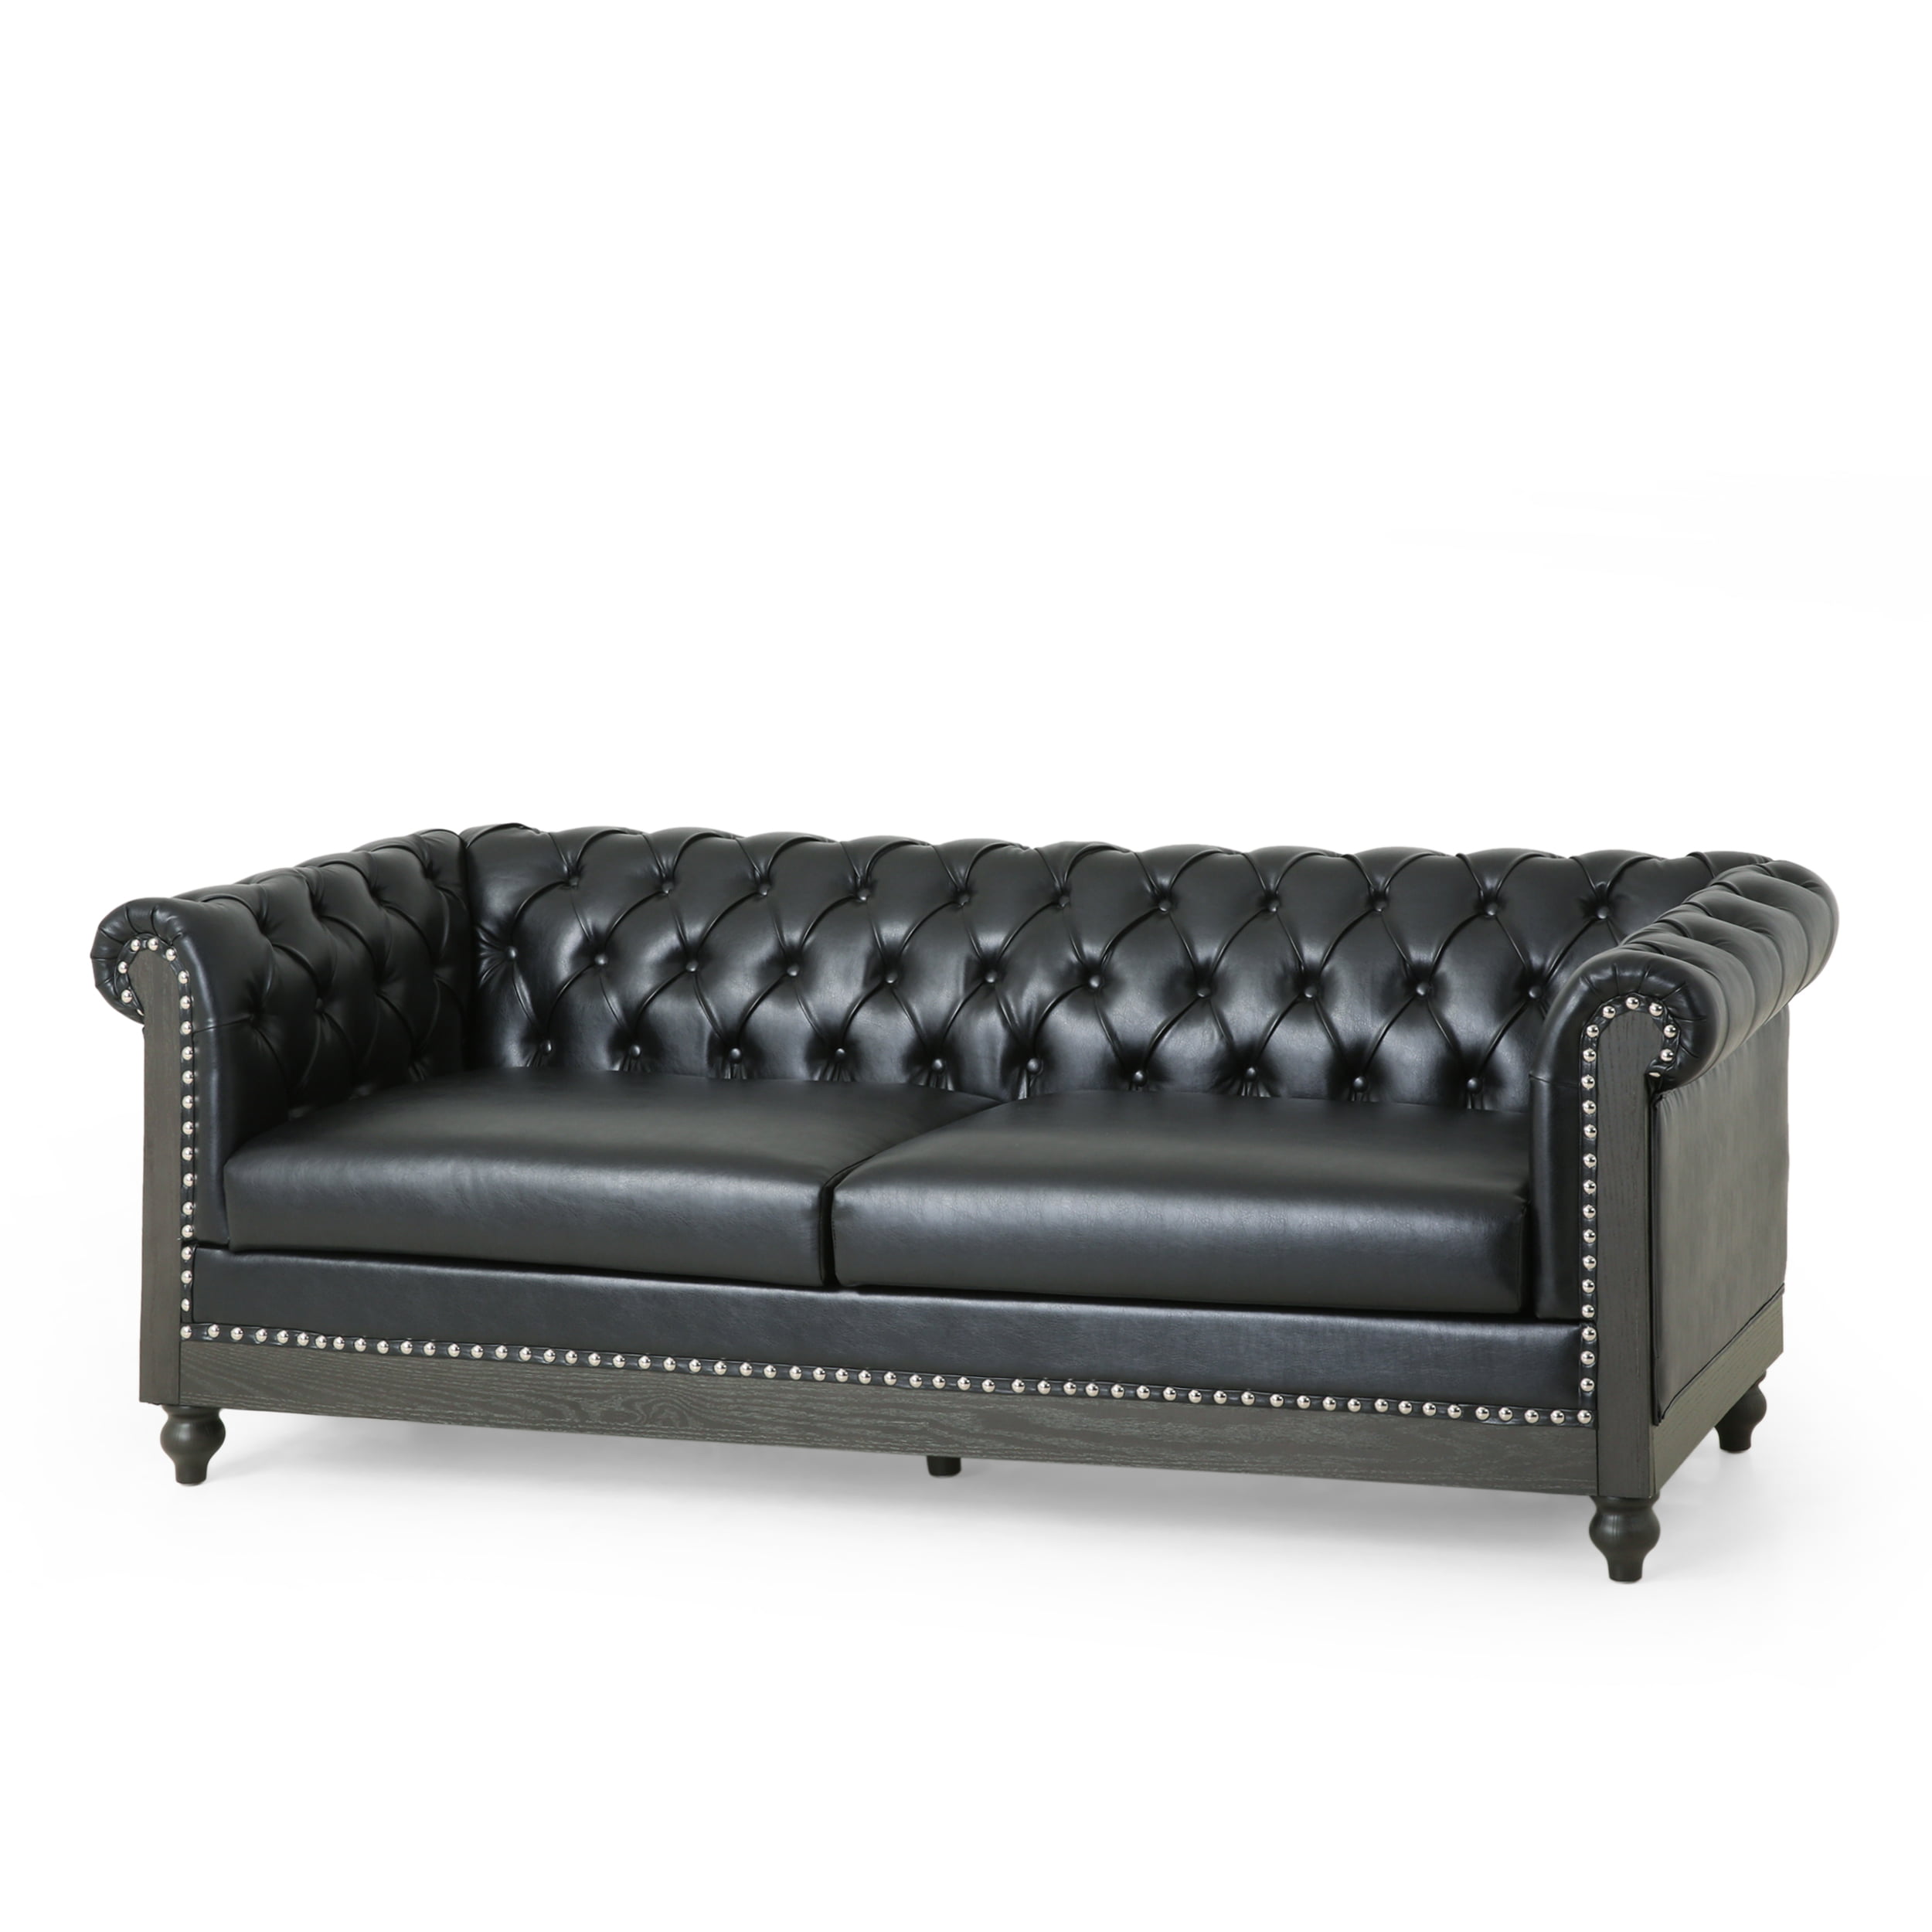 Kinzie Chesterfield Tufted 3 Seater, Kinzie Chesterfield Tufted Fabric 3 Seater Sofa With Nailhead Trim